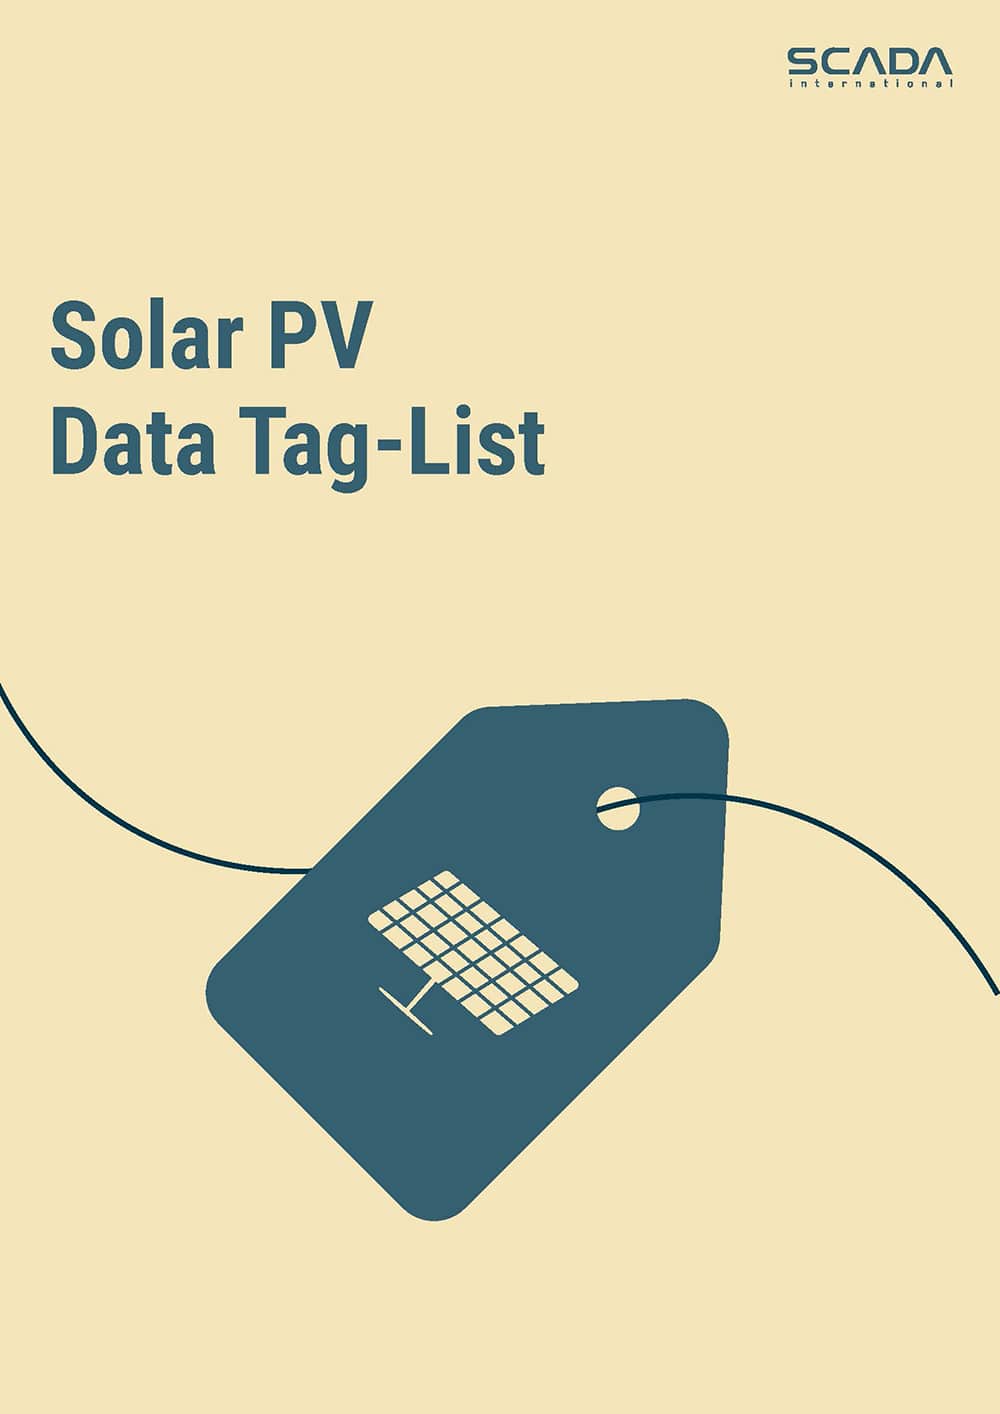 Graphic for the cover of the Solar PV Data Taglist with yellow background and a blue tag with a solar panel